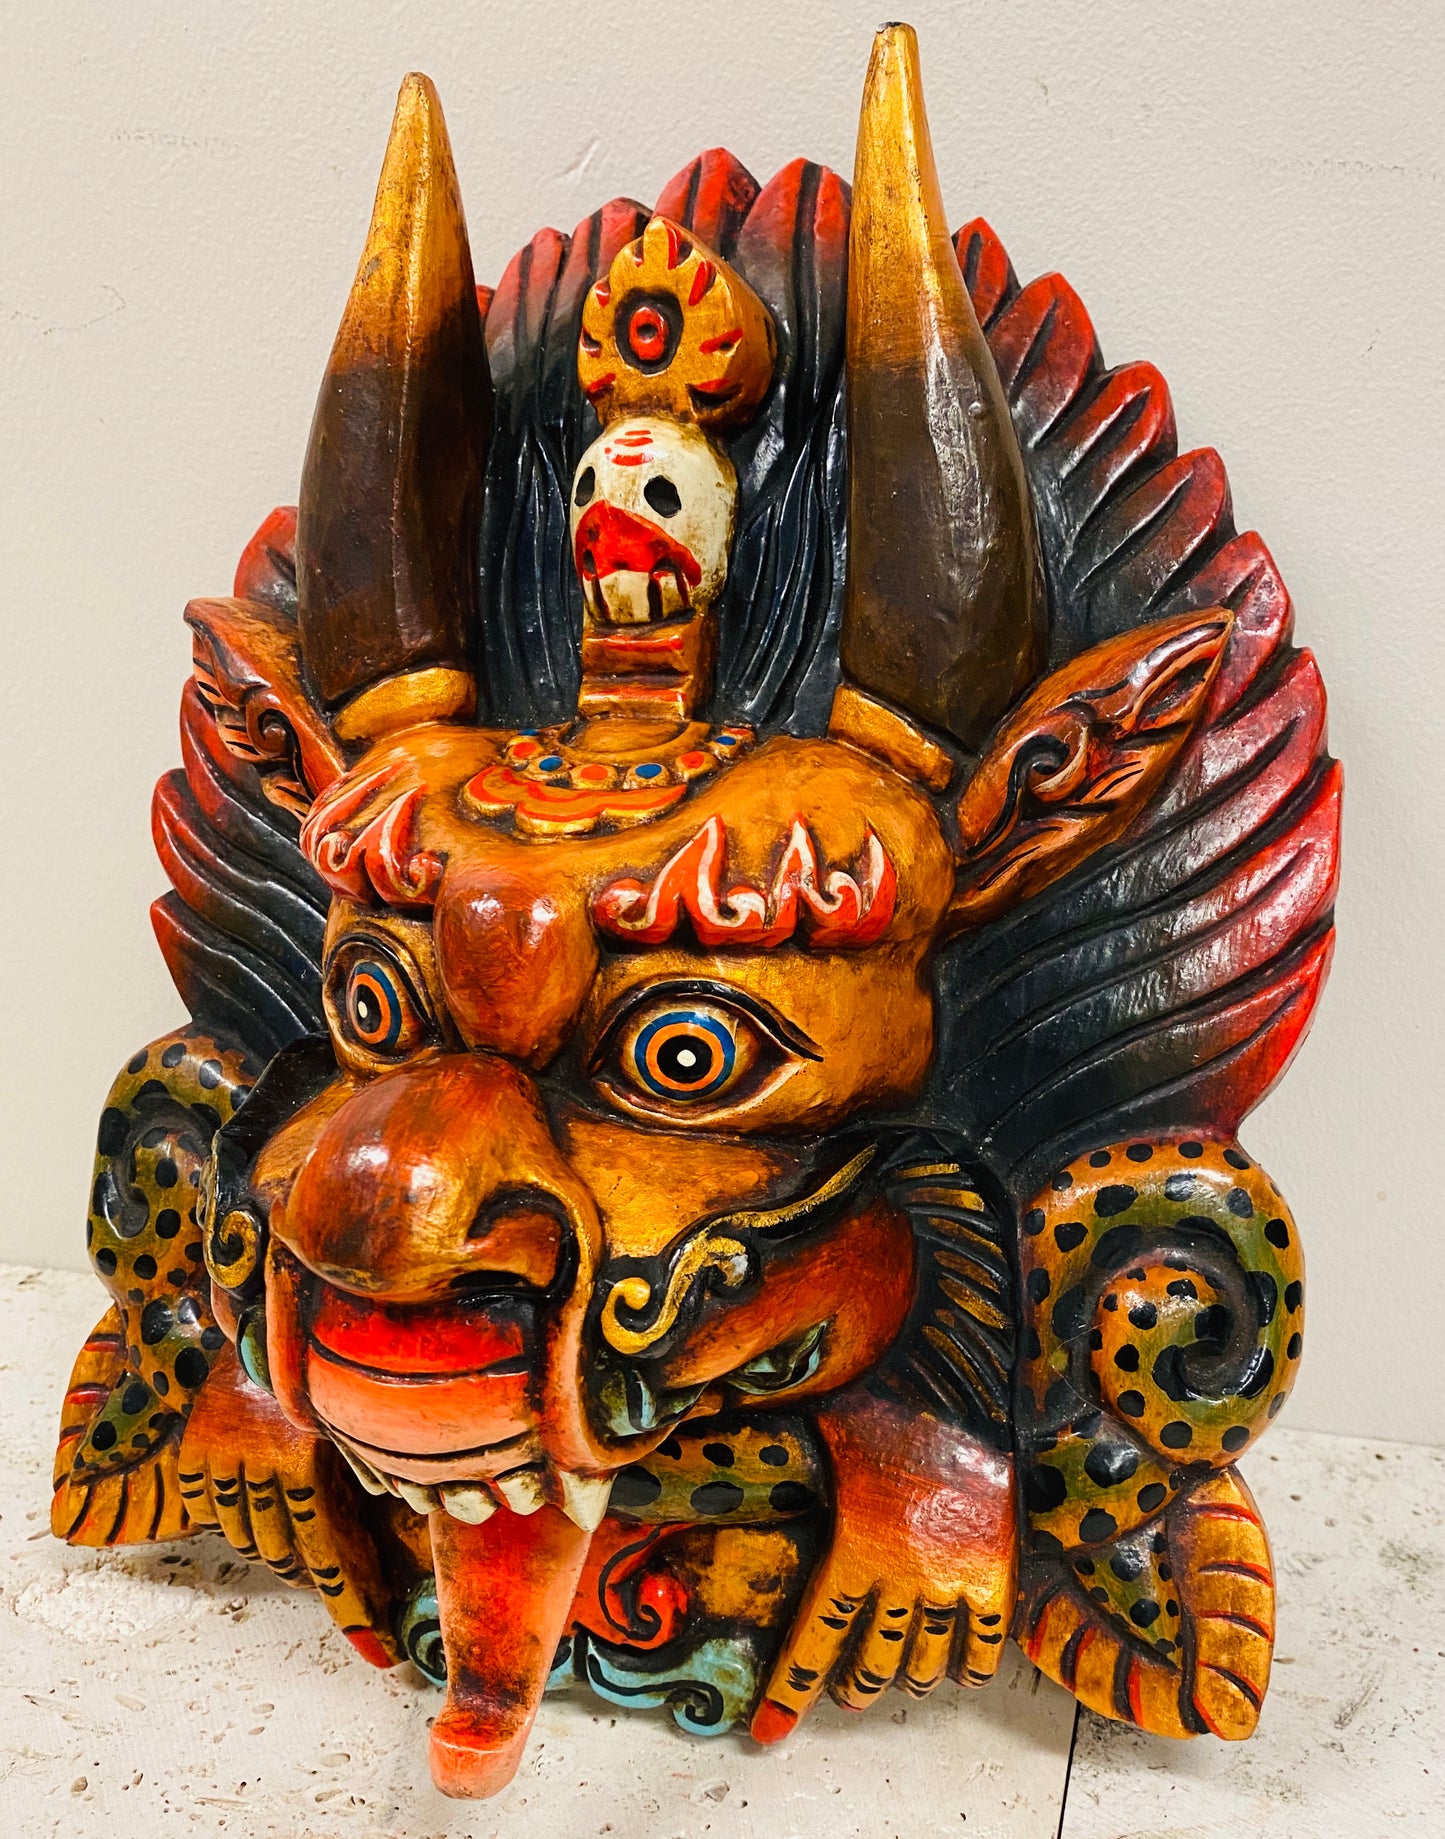 Hand Carved and Painted Cheppu Masks from Nepal